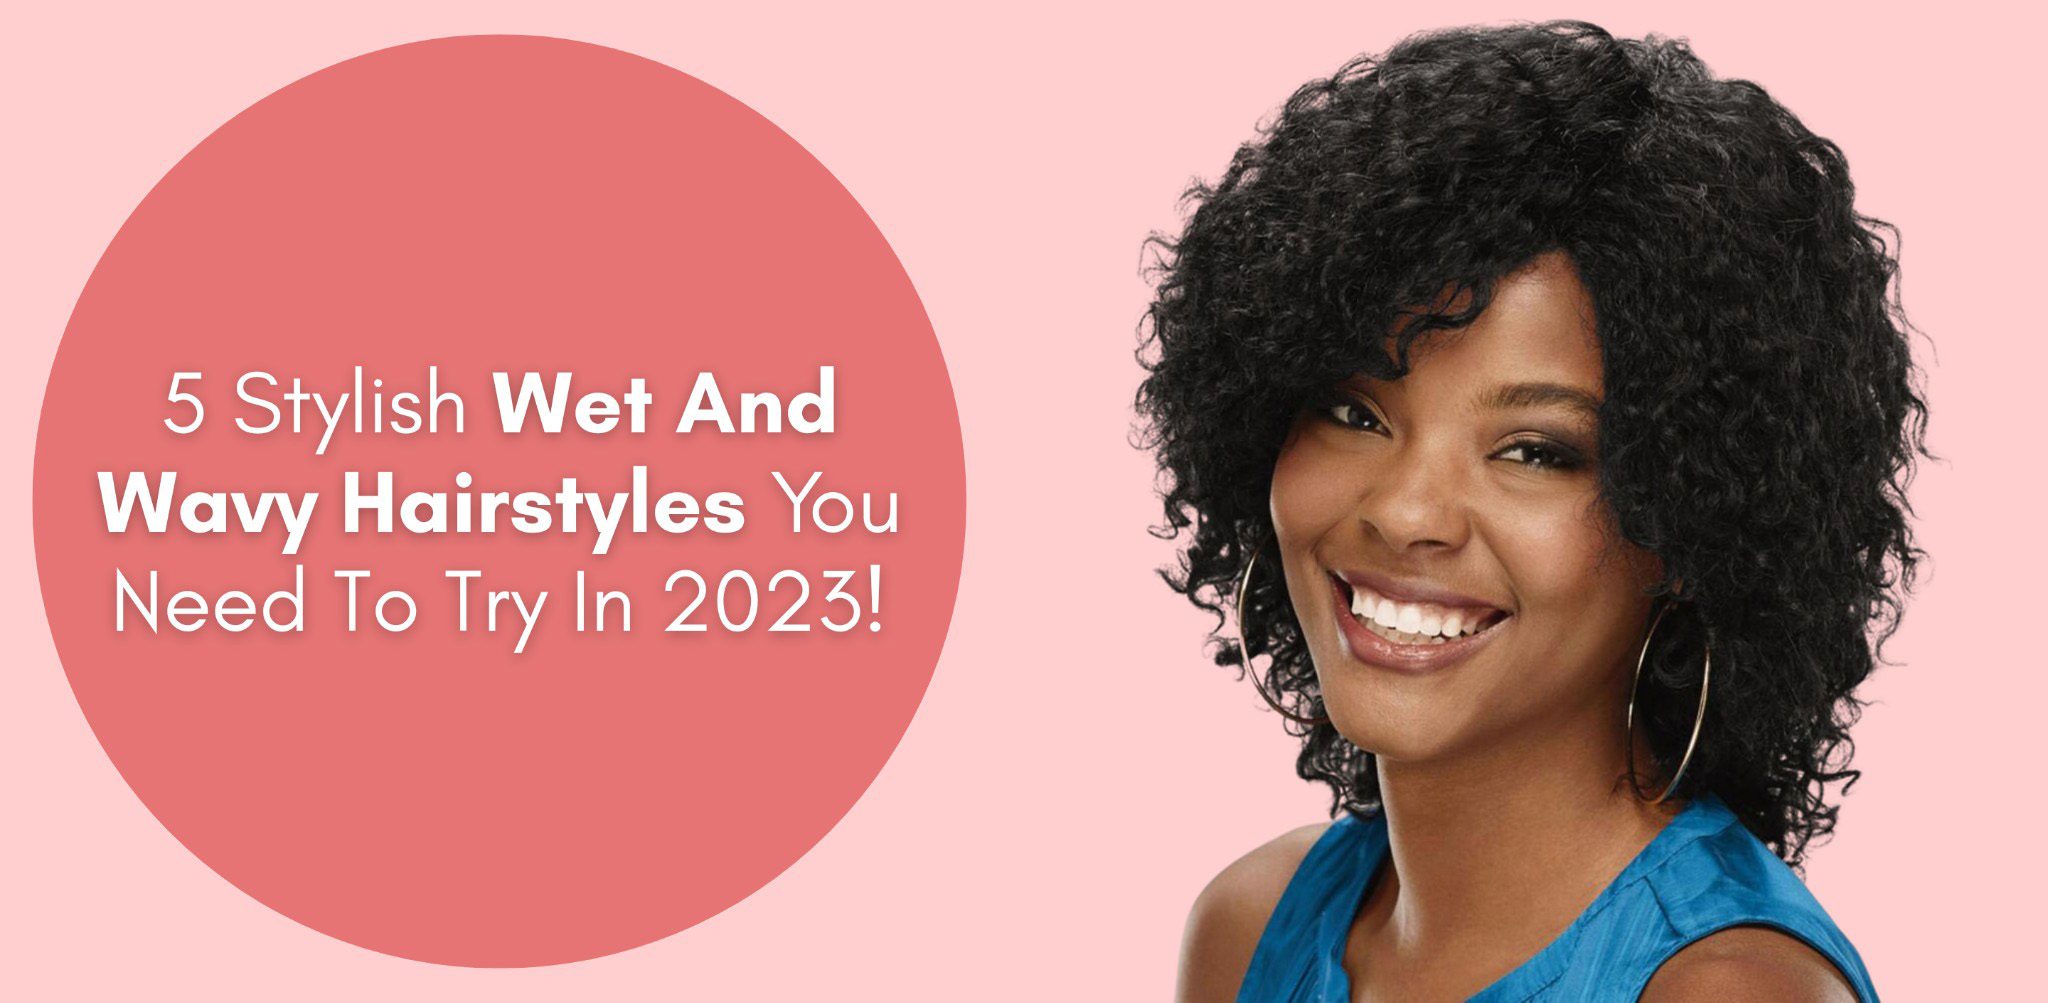 UNLIMITED POSSIBILITIES]  Natural hair styles, Curly hair styles, Wavy  curly hair